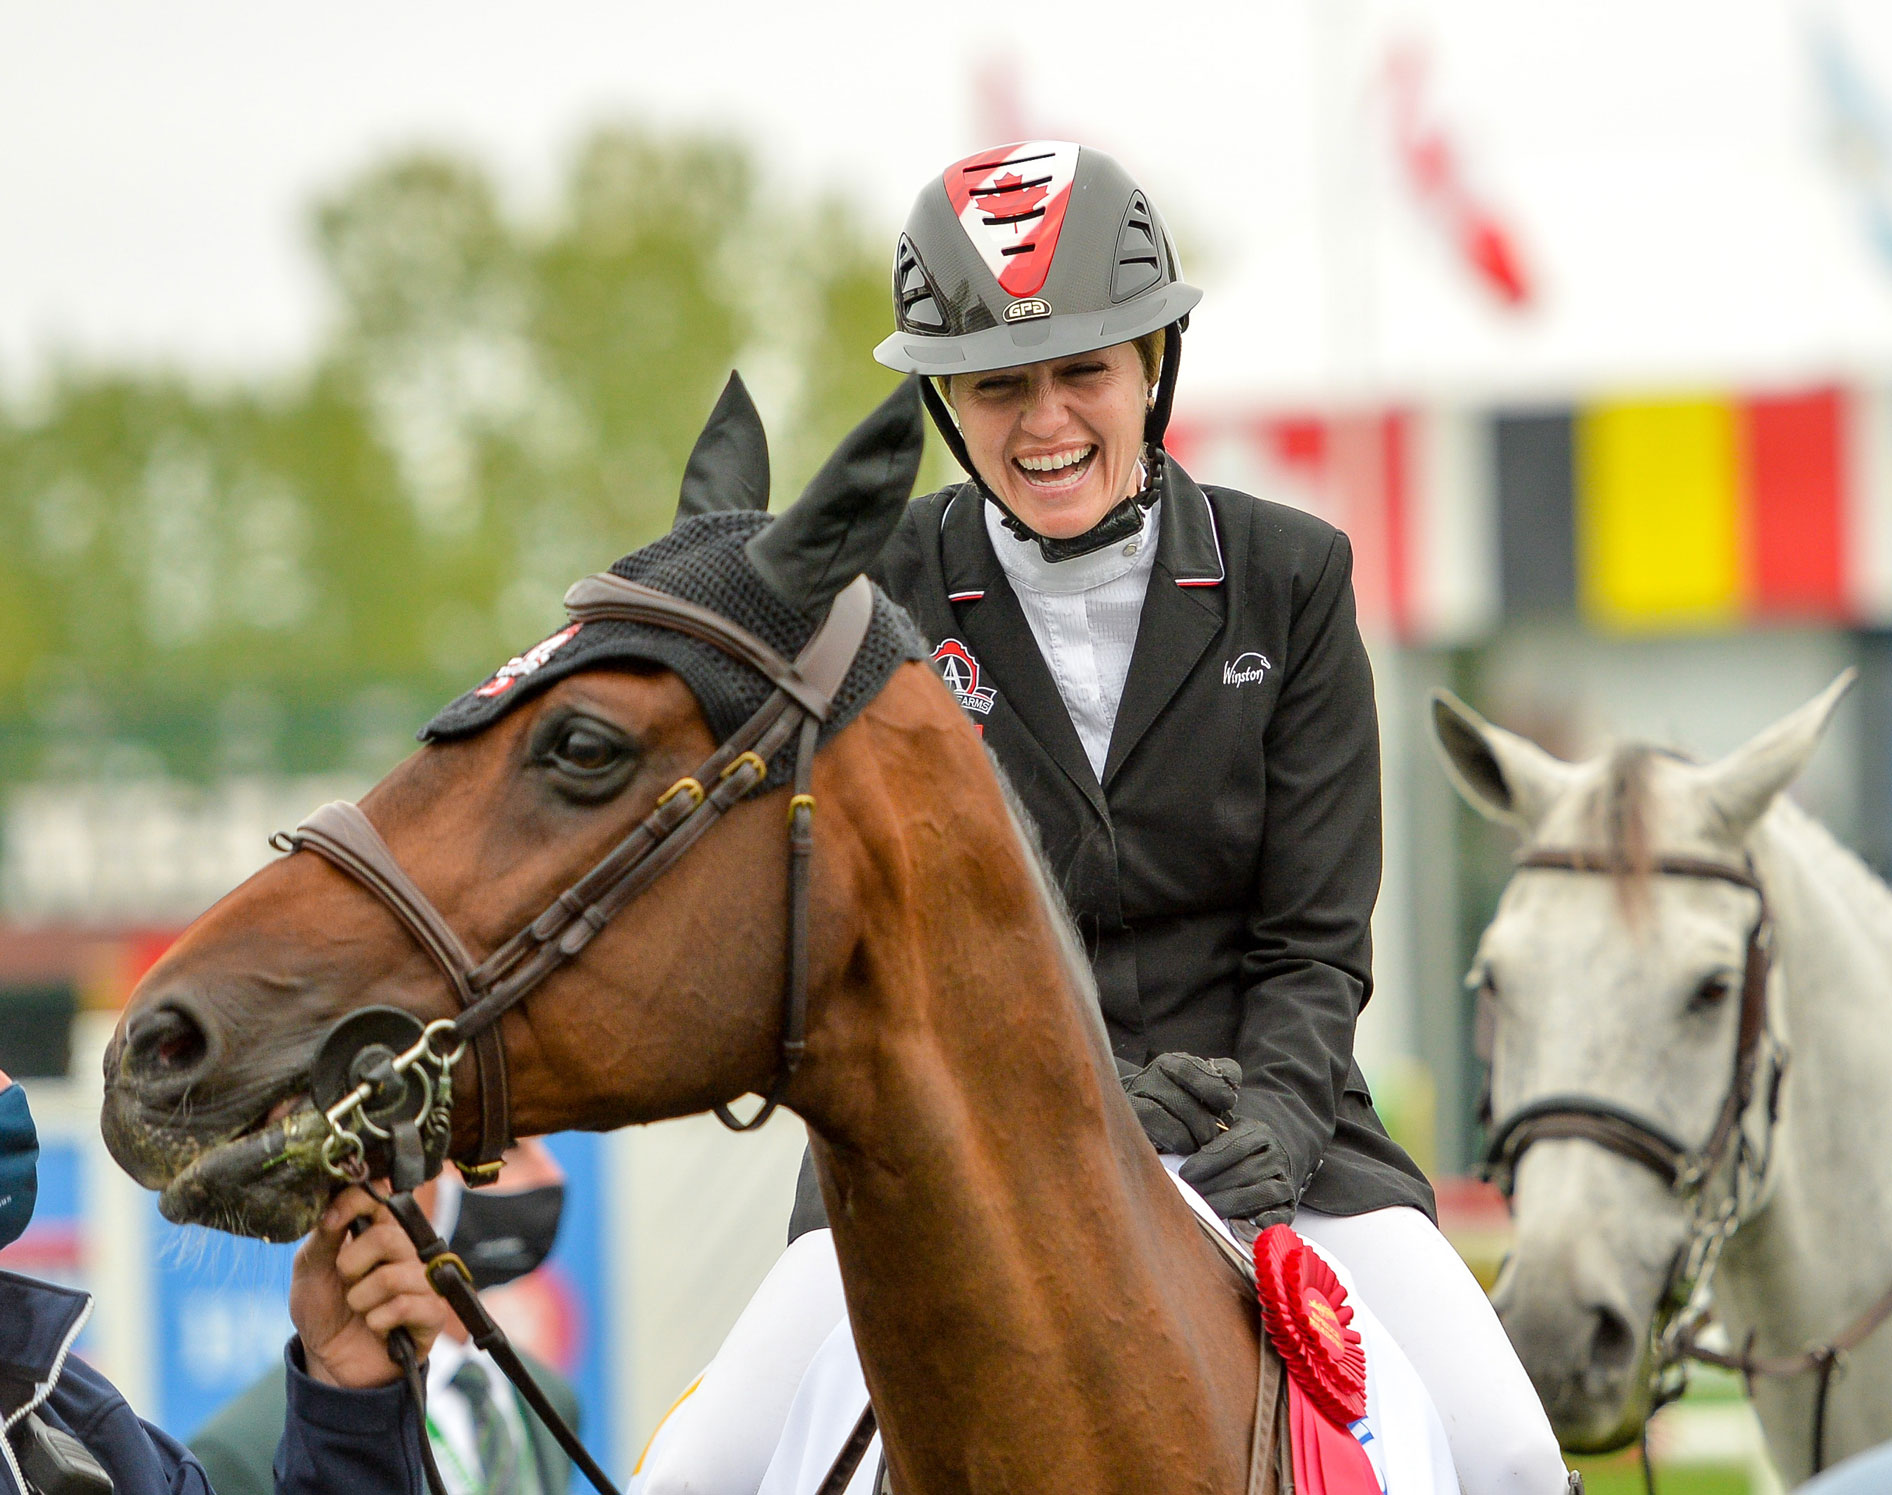 Tiffany Foster at Spruce Meadows